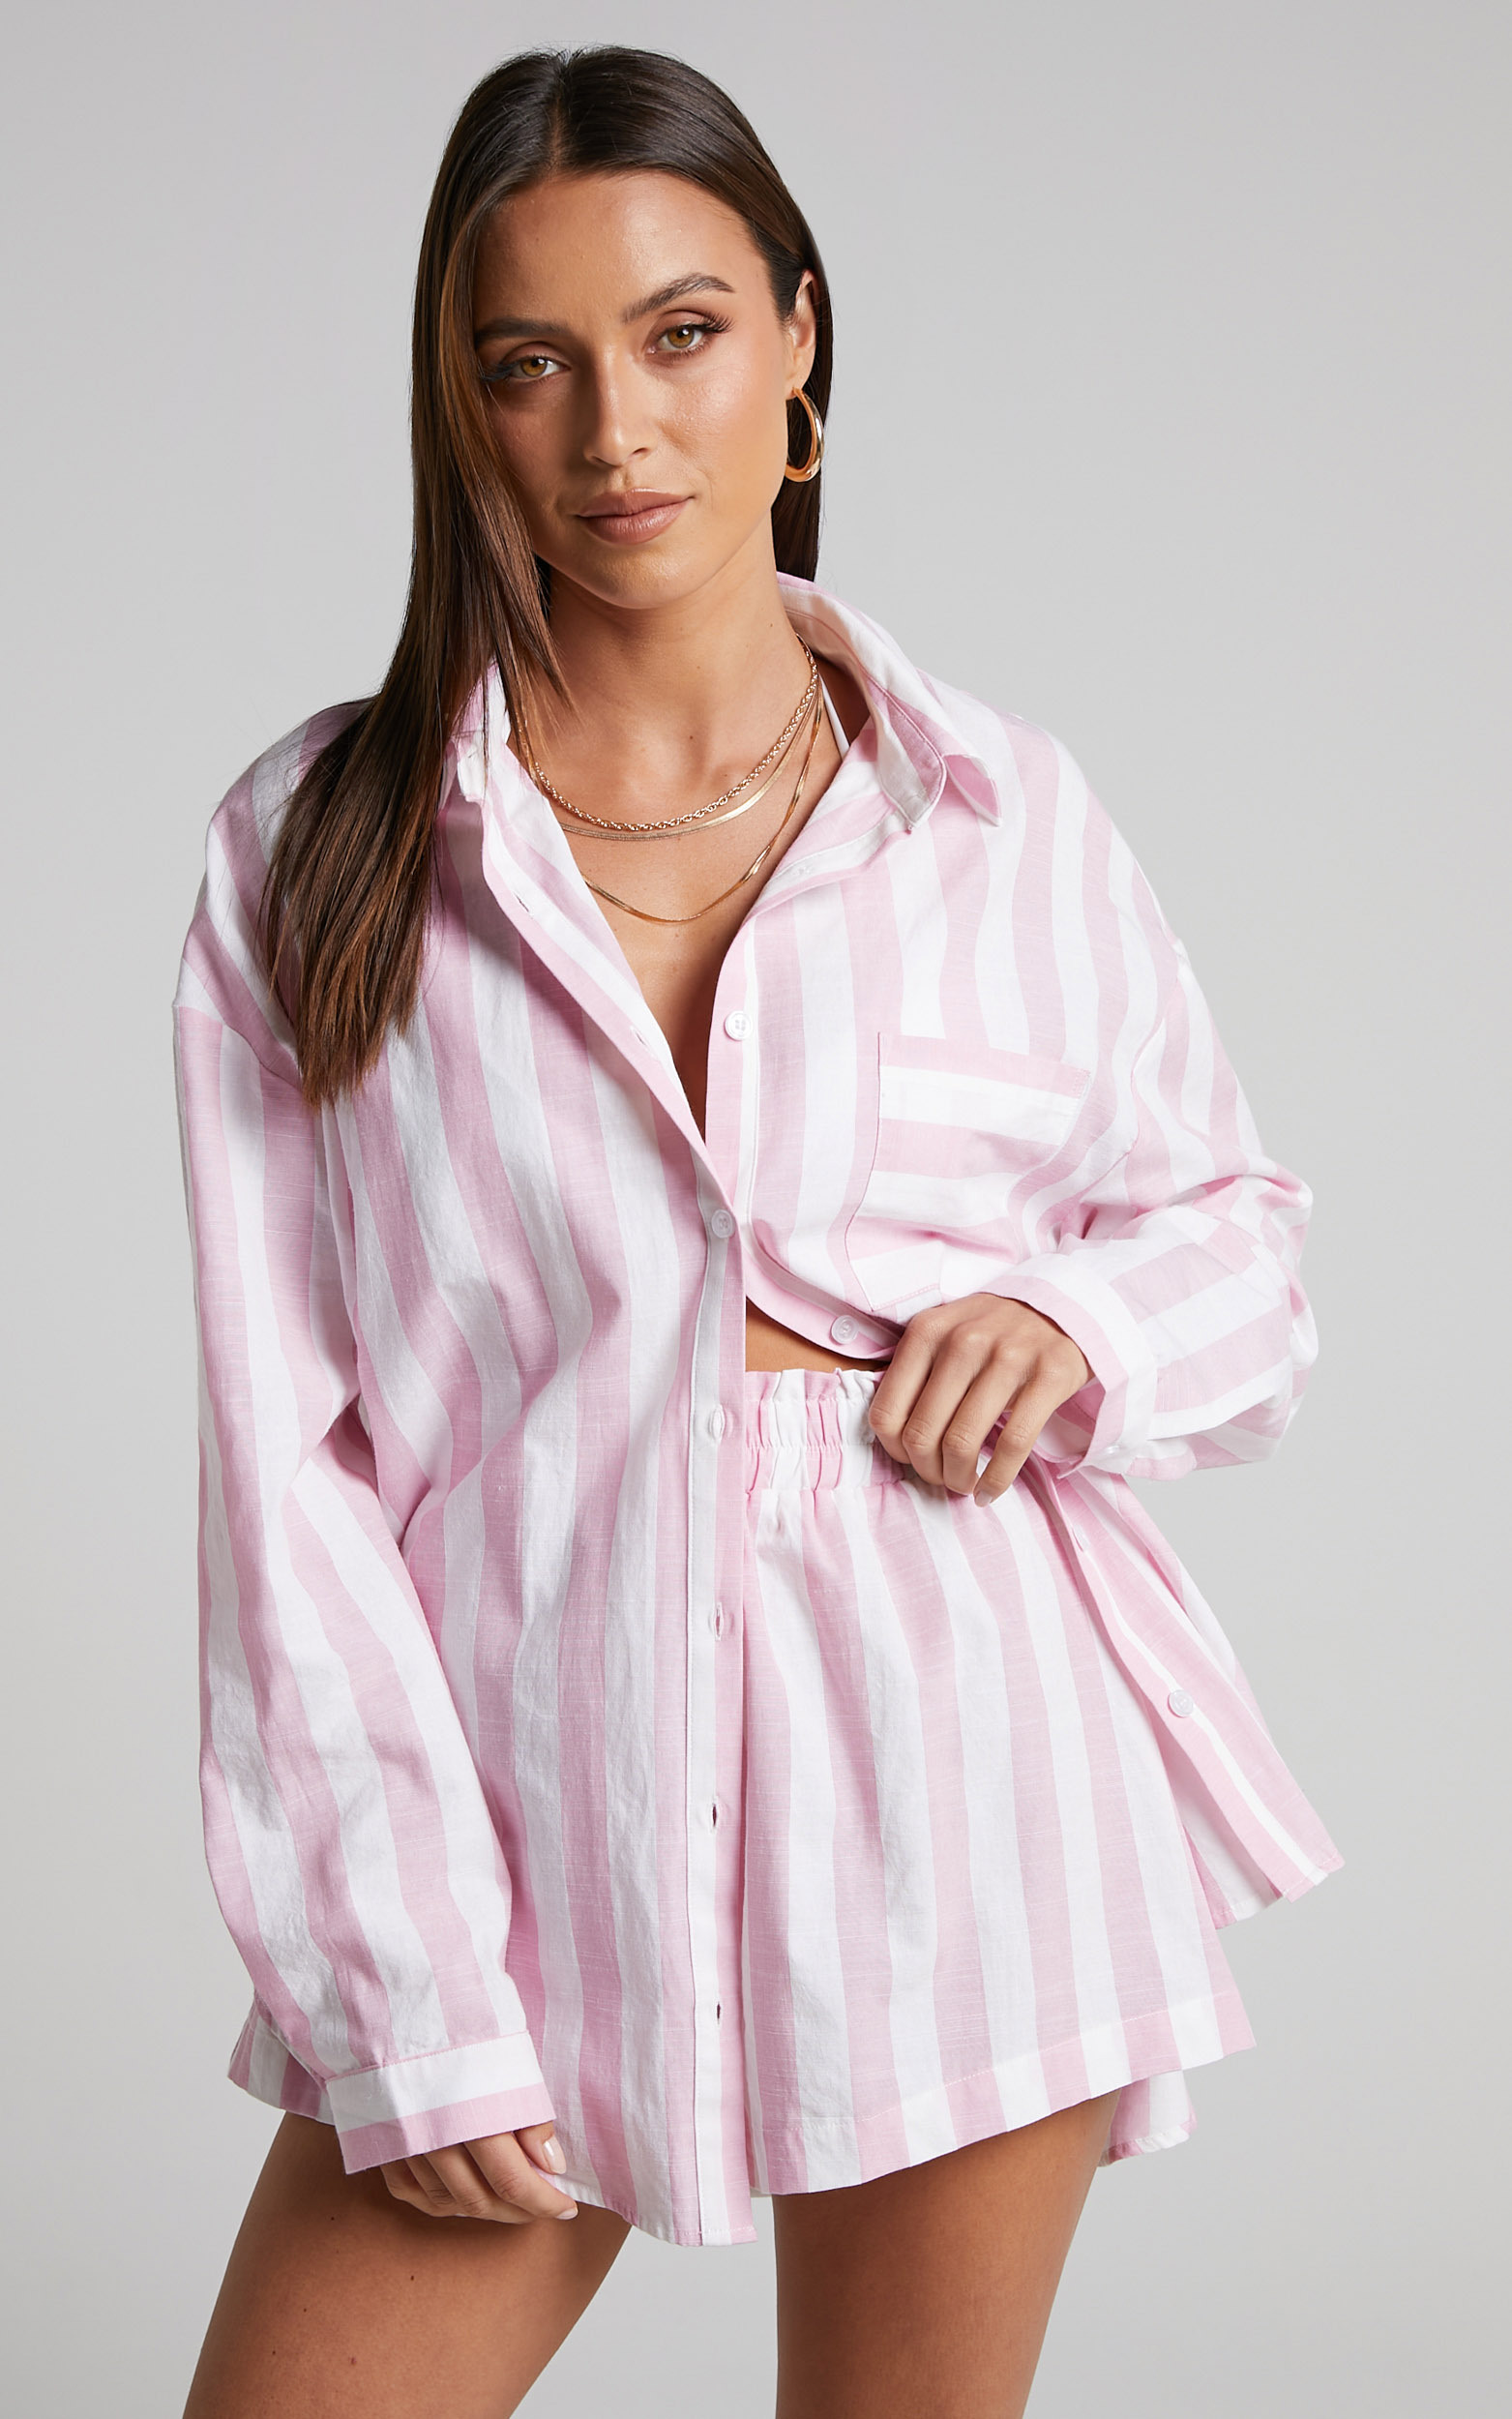 Sahle Shirt - Oversized Striped Shirt in Pink - 04, PNK1, hi-res image number null